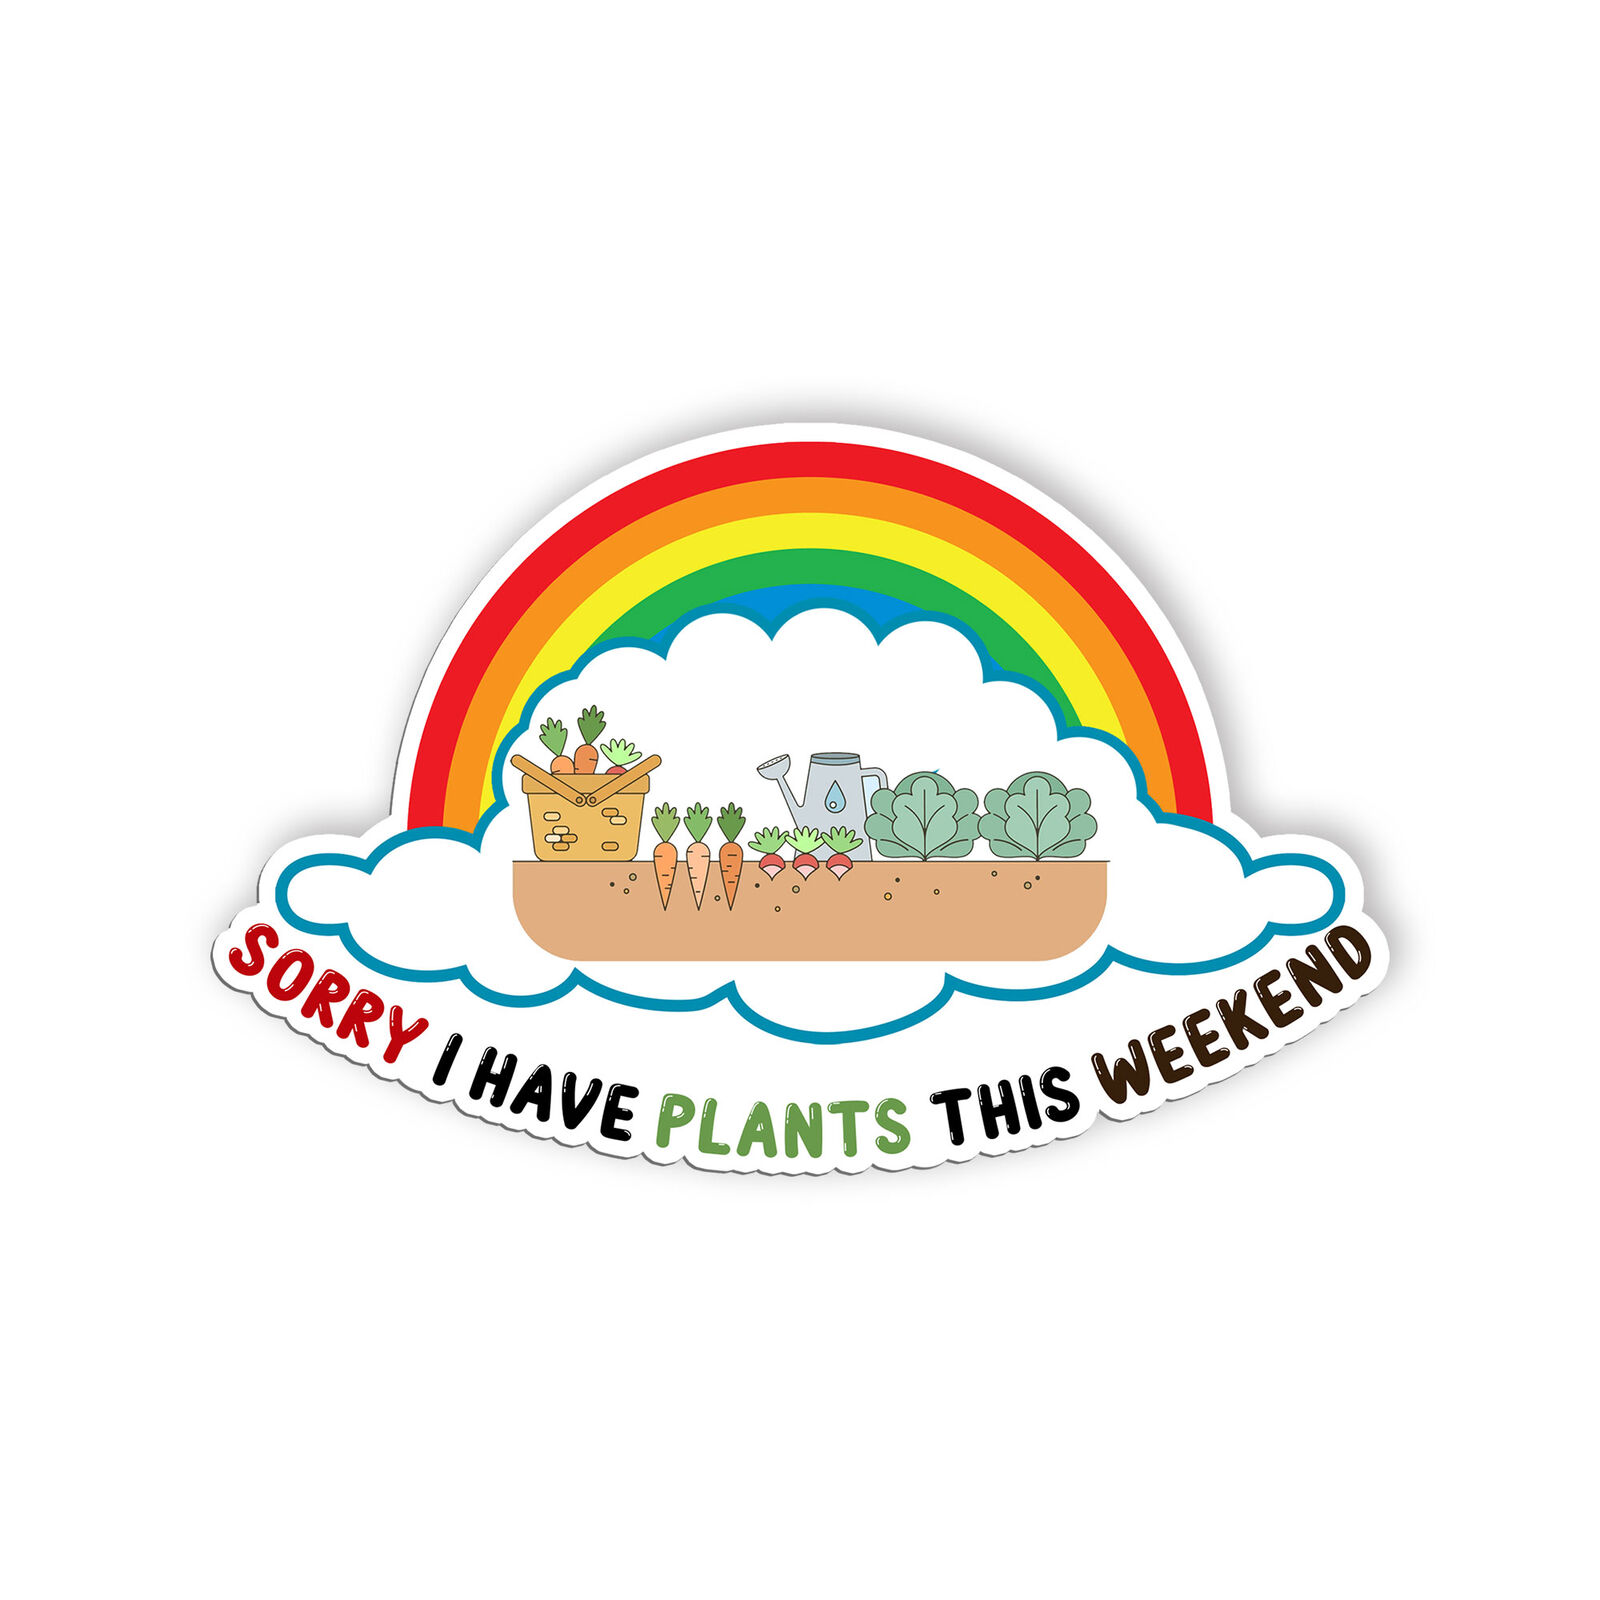 Sorry I Have PLANTs This Weekend Stickers Gardener Lover Stickers Vinyl Size 5in